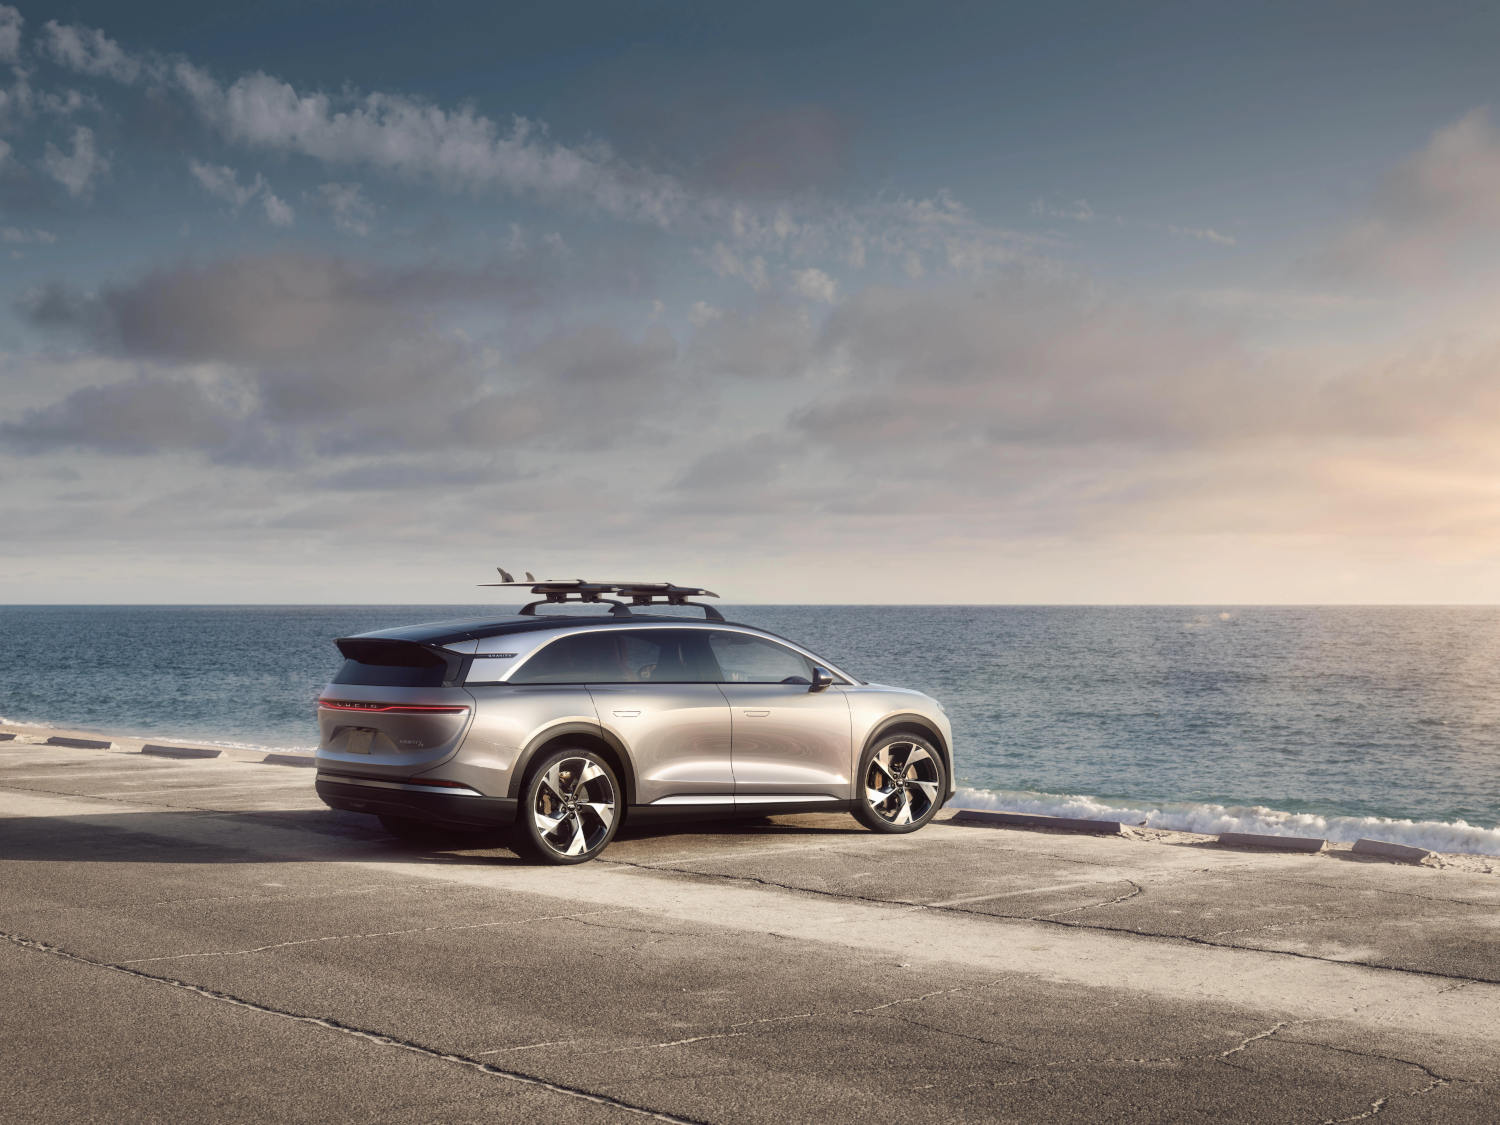 The 2025 Lucid Gravity SUV at the beach